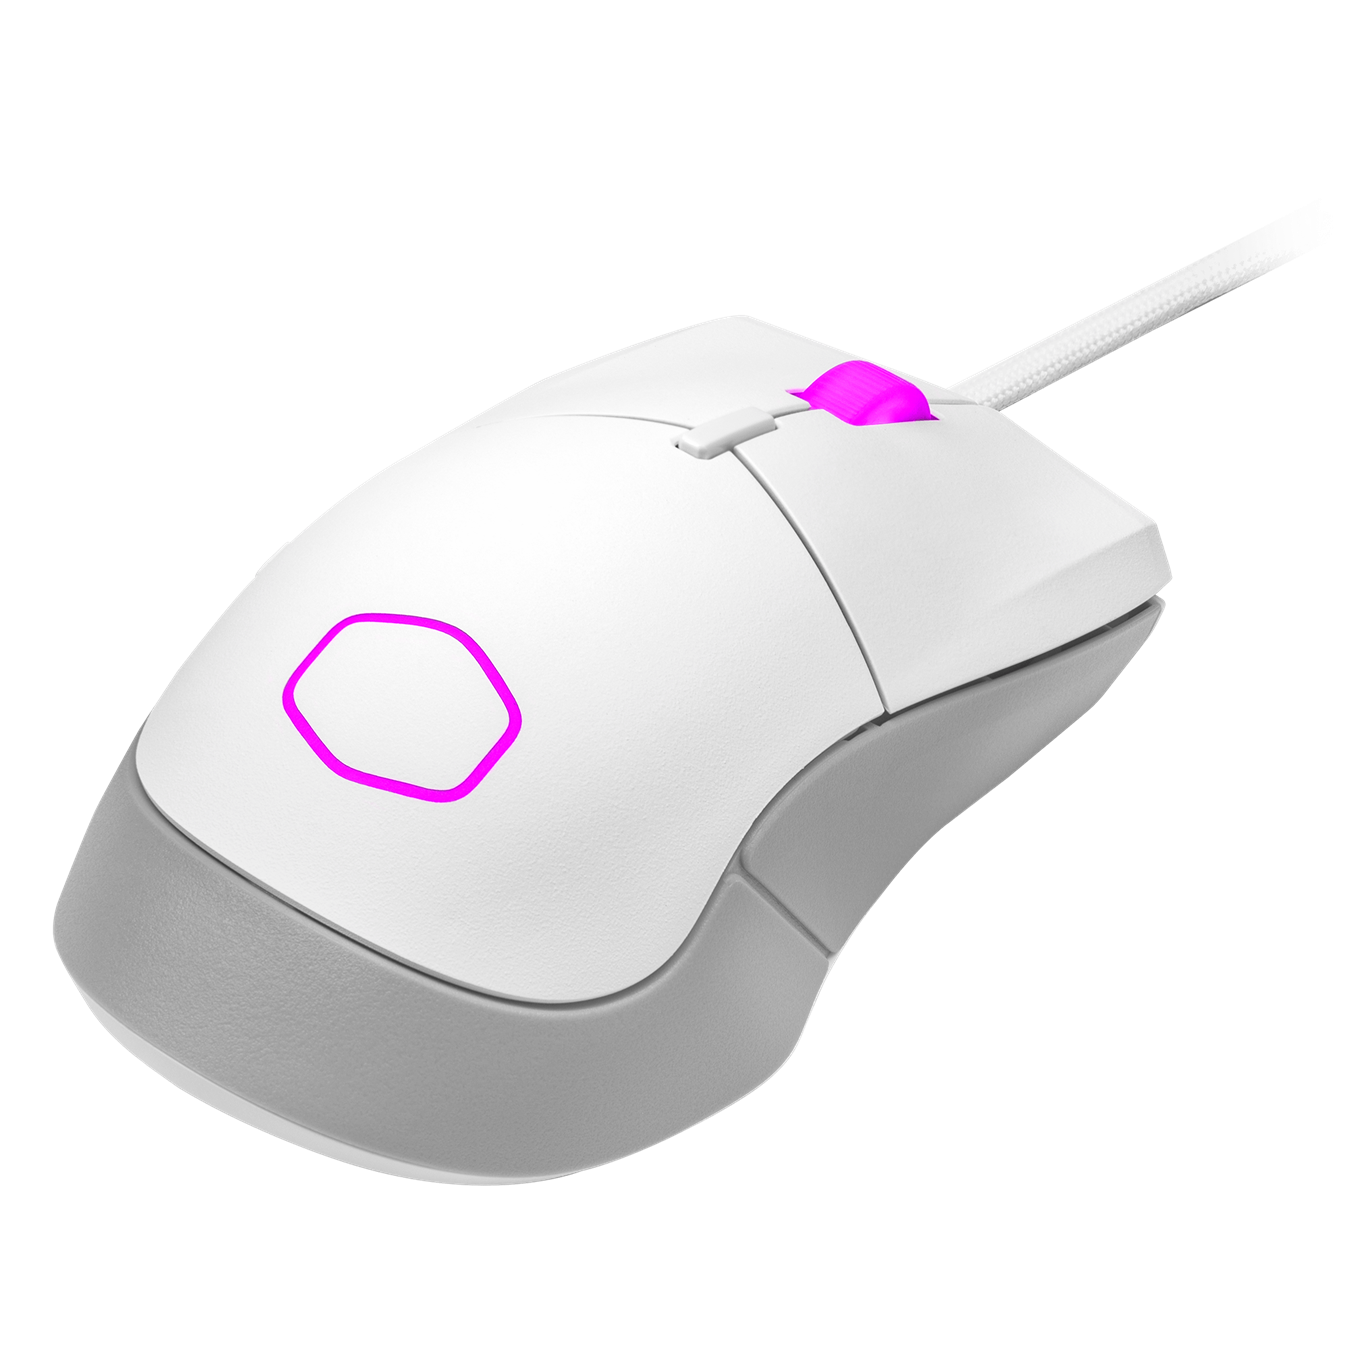 MM310 White Edition Gaming Mouse - Give your victories some flashy good looks with lighting on the logo and the scroll wheel